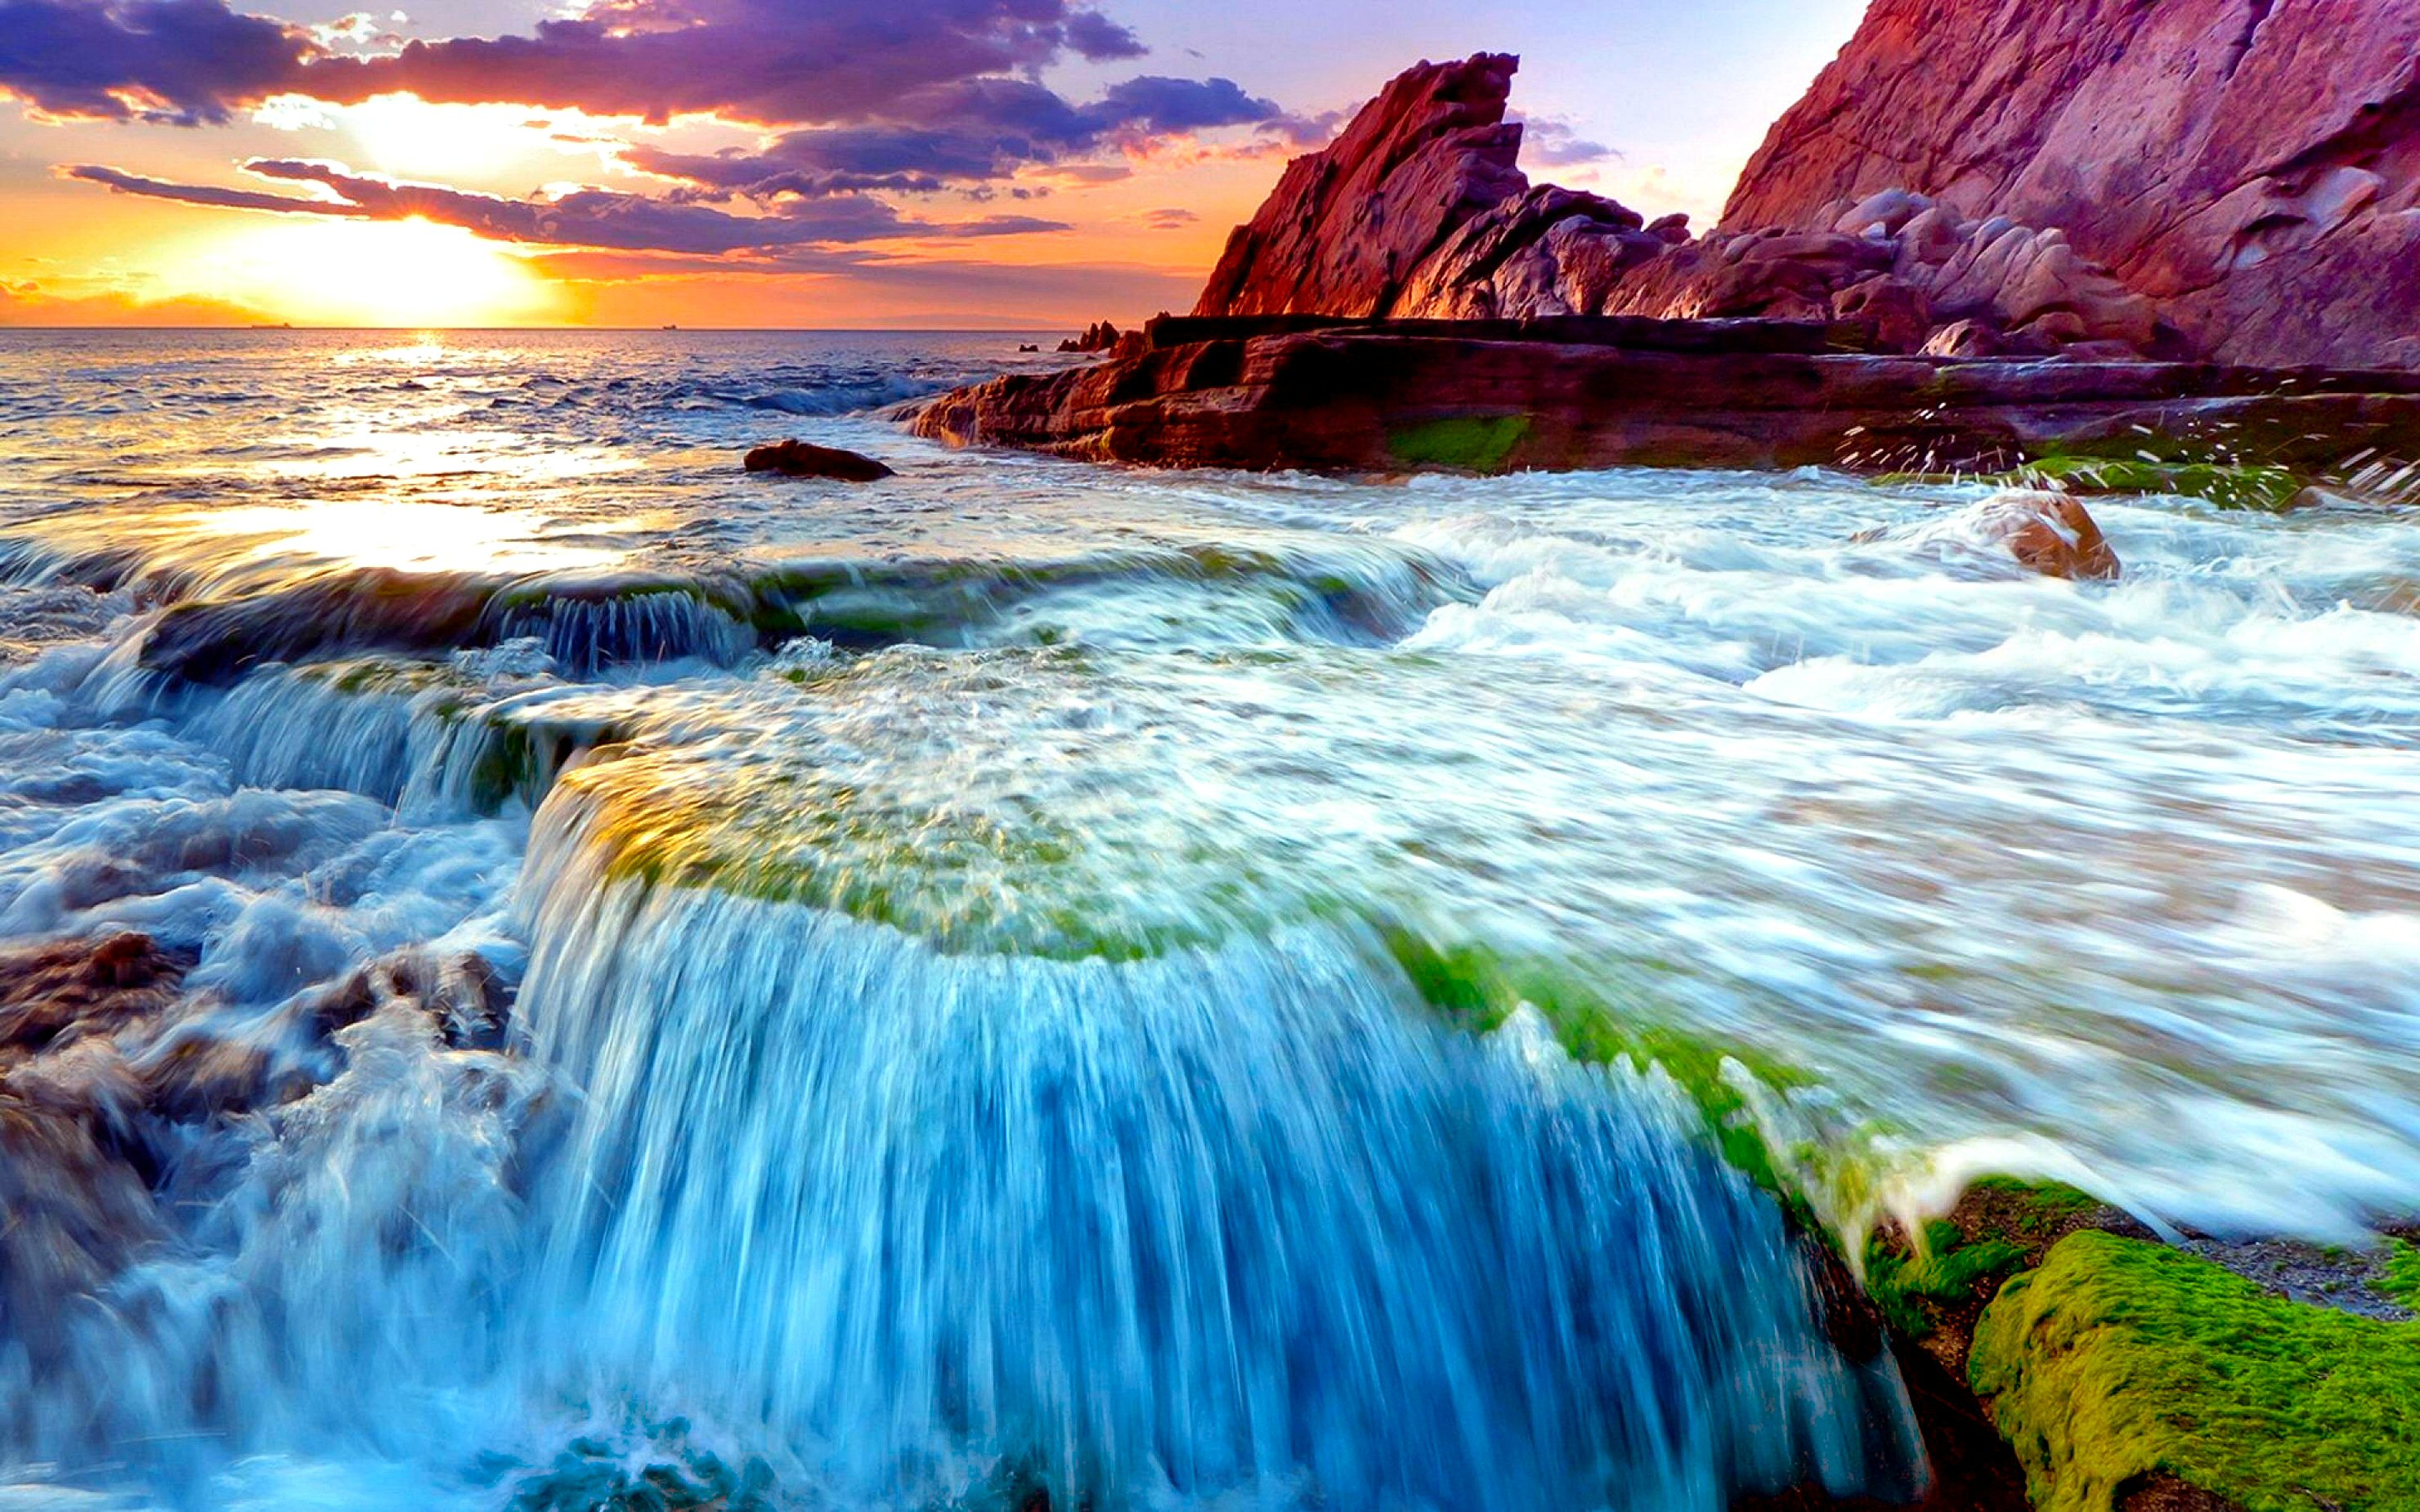 2960x1850 9 Spectacular HD Waterfall Wallpapers to Download